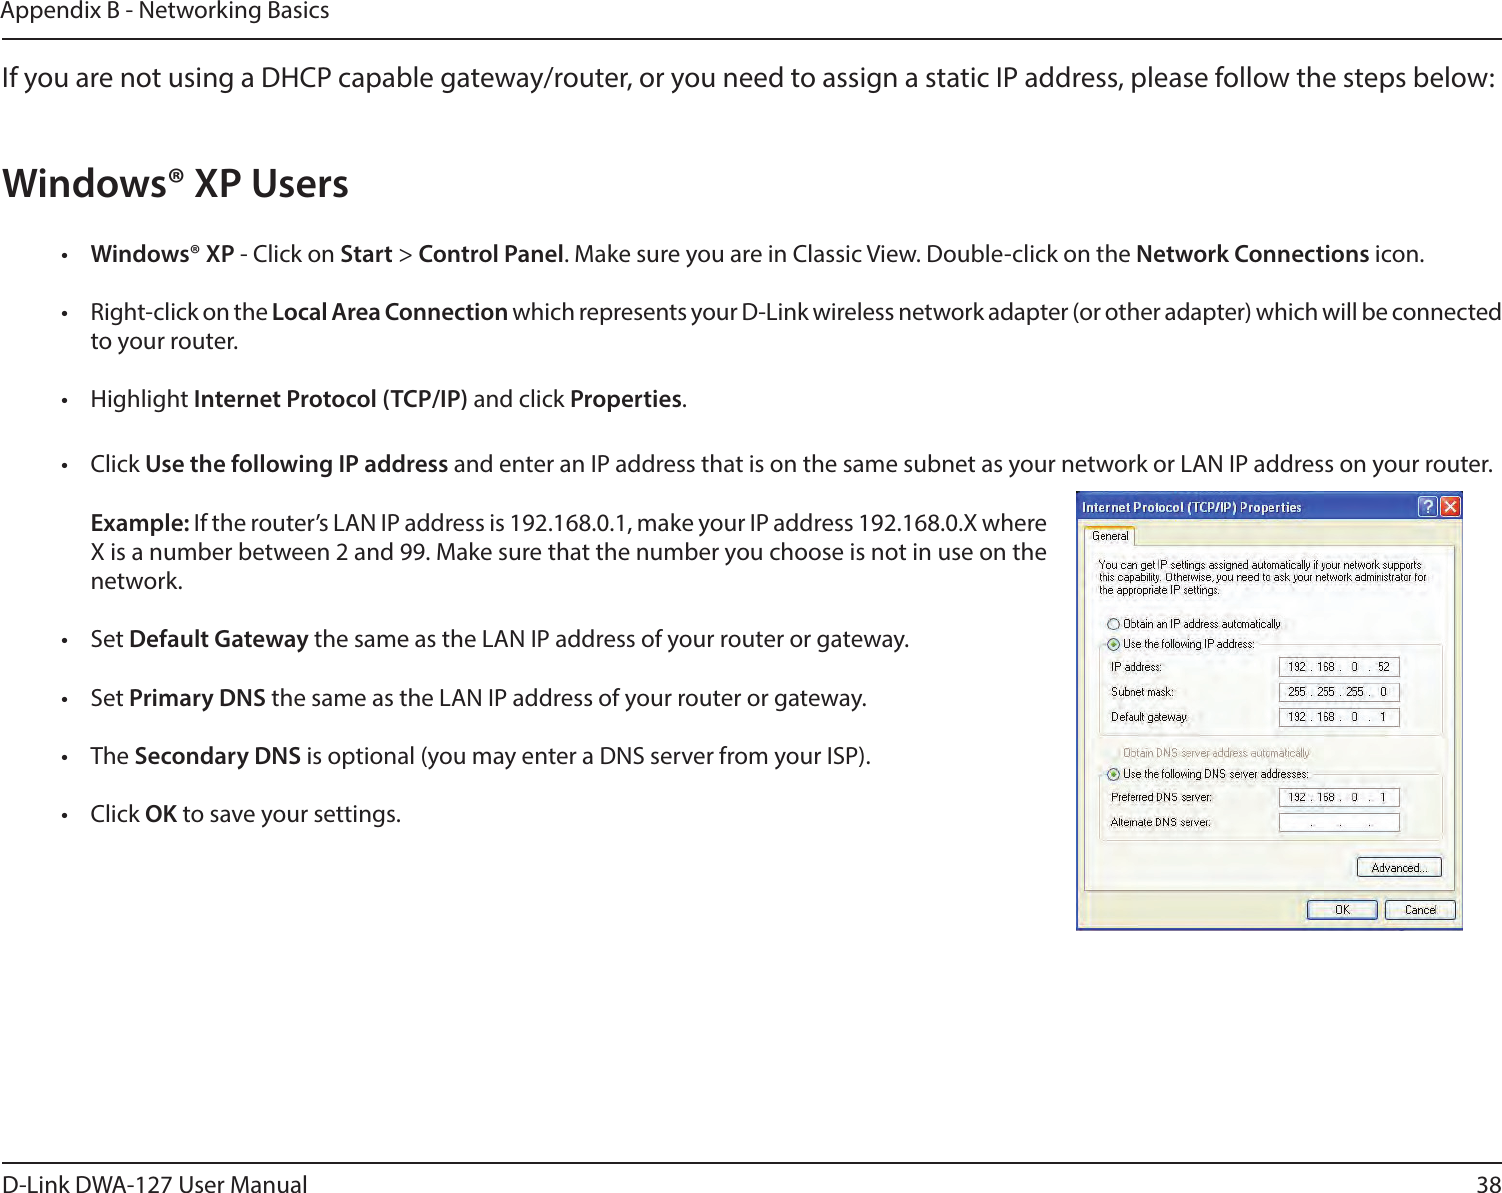 38D-Link DWA-127 User ManualAppendix B - Networking BasicsIf you are not using a DHCP capable gateway/router, or you need to assign a static IP address, please follow the steps below:Windows® XP Users•  Windows® XP - Click on Start &gt; Control Panel. Make sure you are in Classic View. Double-click on the Network Connections icon.•  Right-click on the Local Area Connection which represents your D-Link wireless network adapter (or other adapter) which will be connected to your router.• Highlight Internet Protocol (TCP/IP) and click Properties.• Click Use the following IP address and enter an IP address that is on the same subnet as your network or LAN IP address on your router. Example: If the router’s LAN IP address is 192.168.0.1, make your IP address 192.168.0.X where X is a number between 2 and 99. Make sure that the number you choose is not in use on the network. • Set Default Gateway the same as the LAN IP address of your router or gateway.• Set Primary DNS the same as the LAN IP address of your router or gateway. • The Secondary DNS is optional (you may enter a DNS server from your ISP).• Click OK to save your settings.